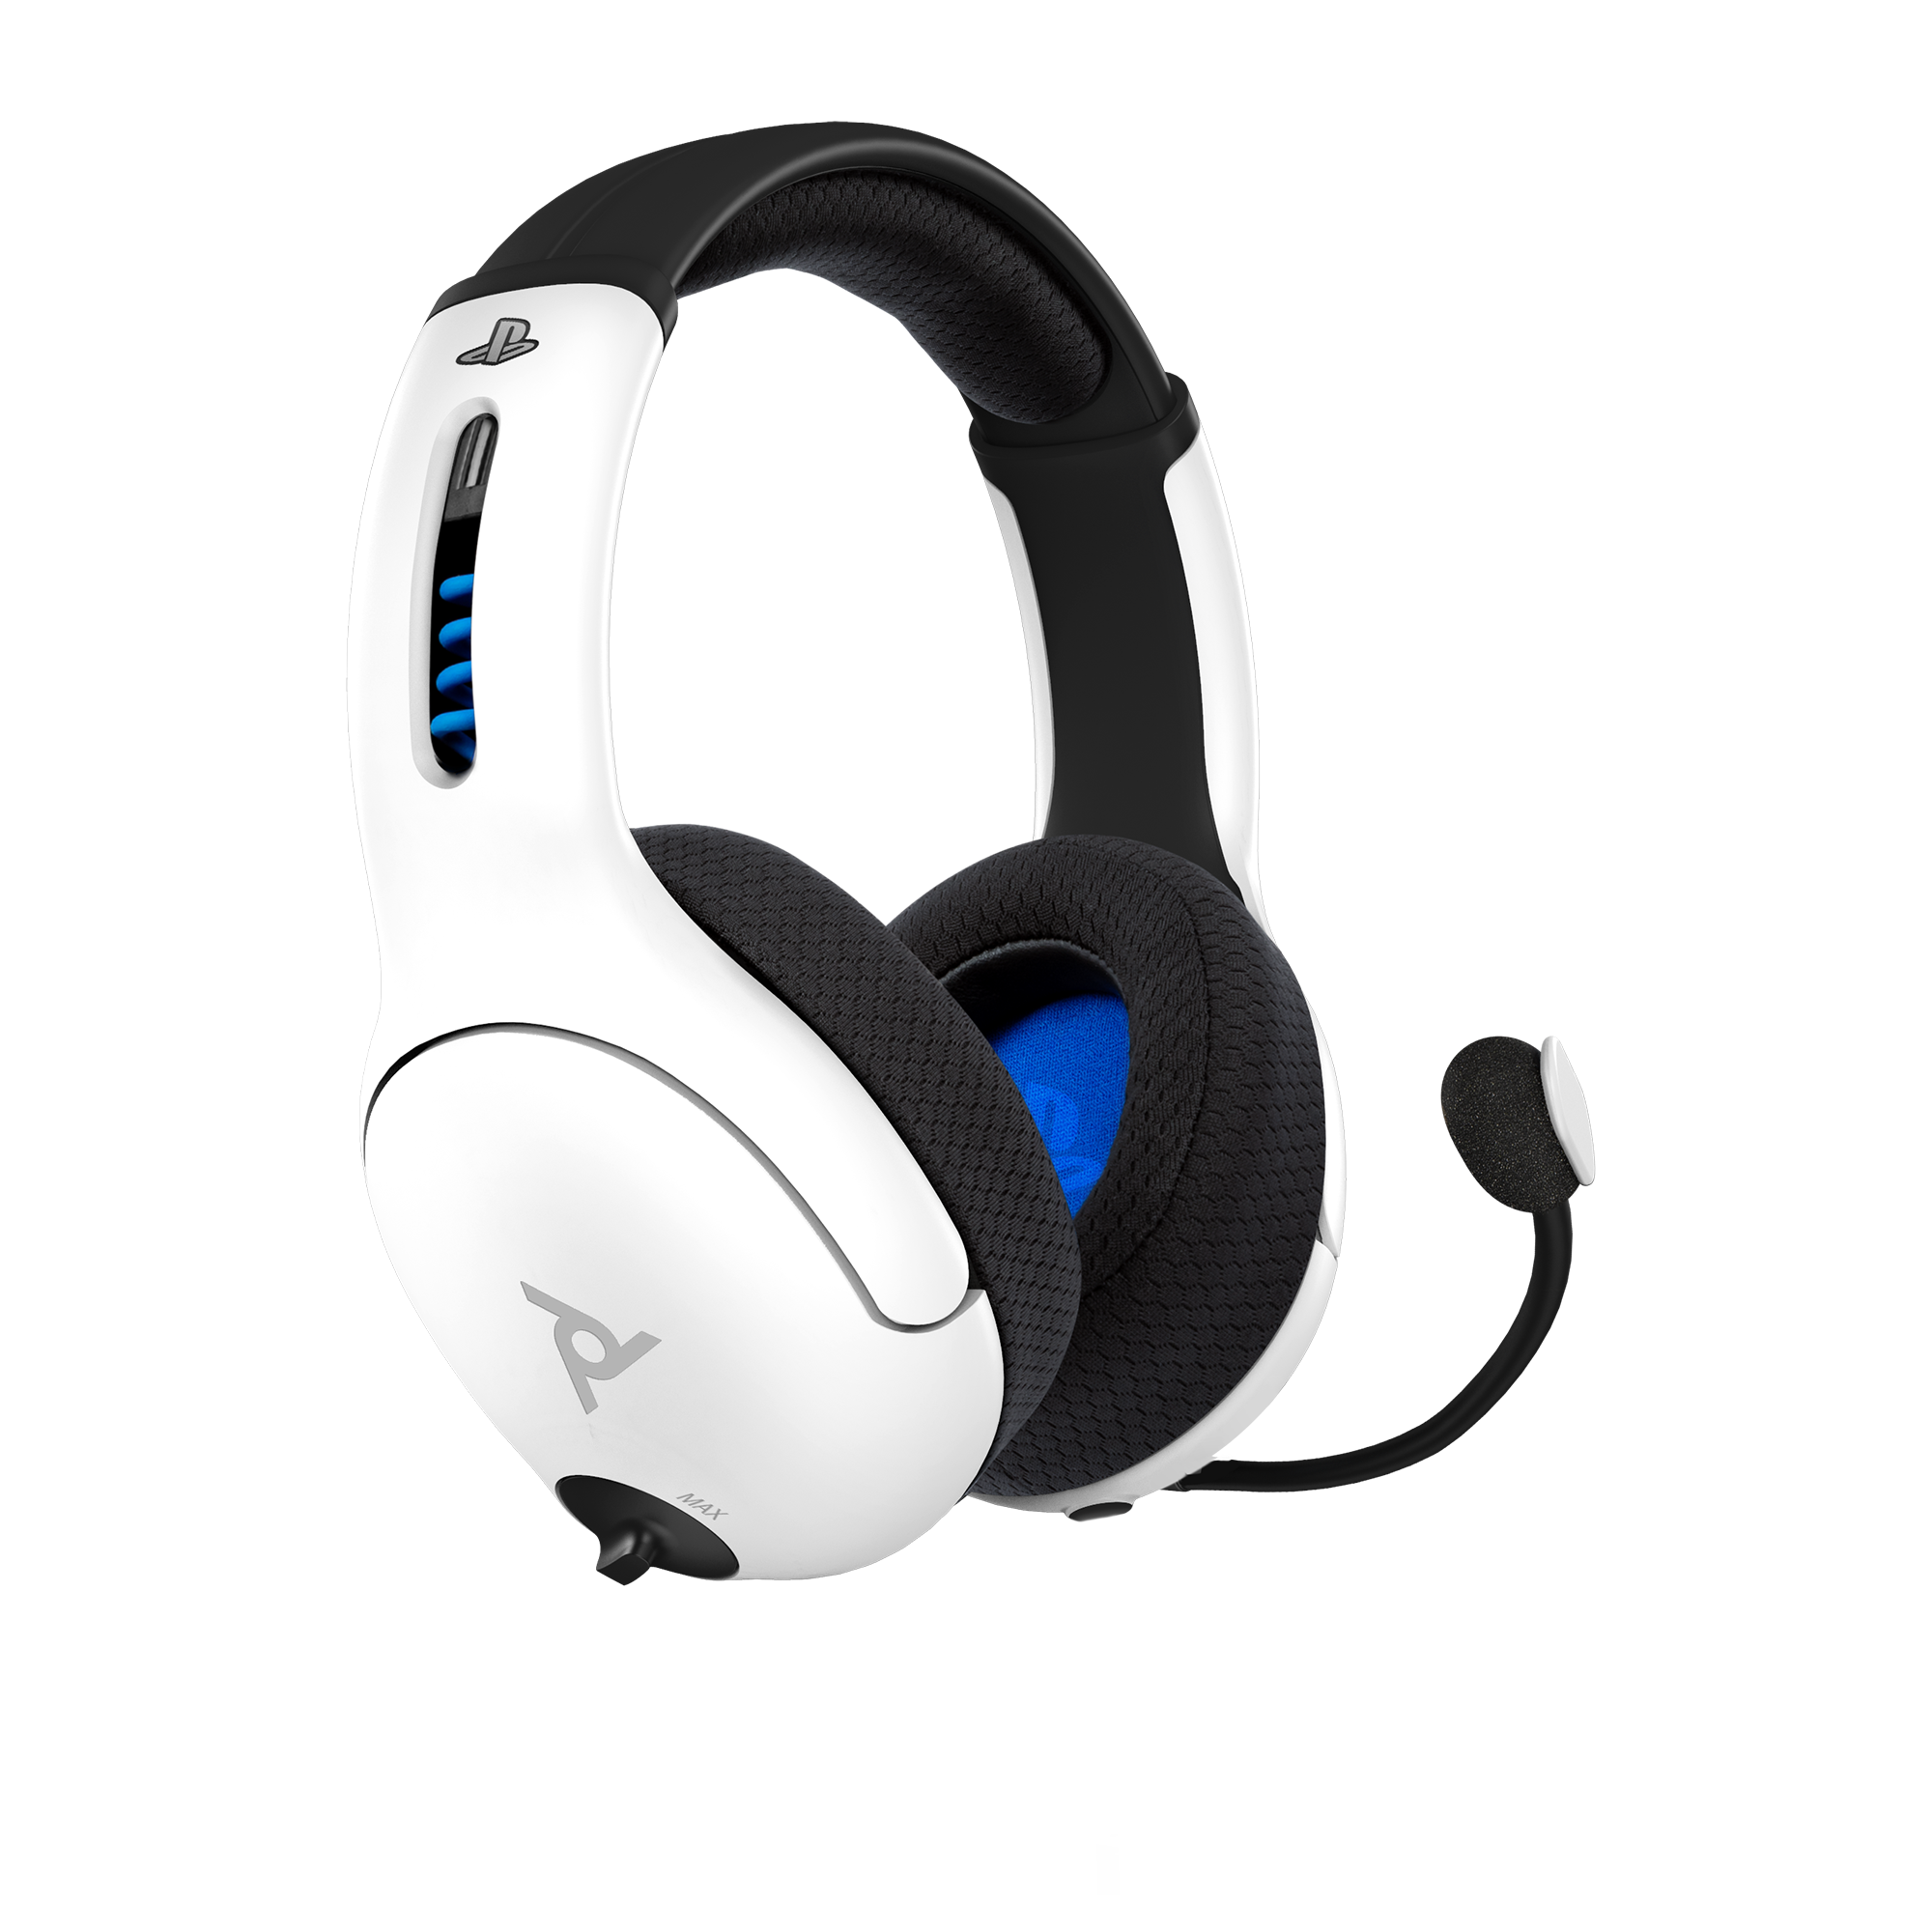 Stier Verbinding Wet en regelgeving PDP Gaming LVL50 Wireless Stereo Headset for PS4 White | PlayStation 4 |  GameStop